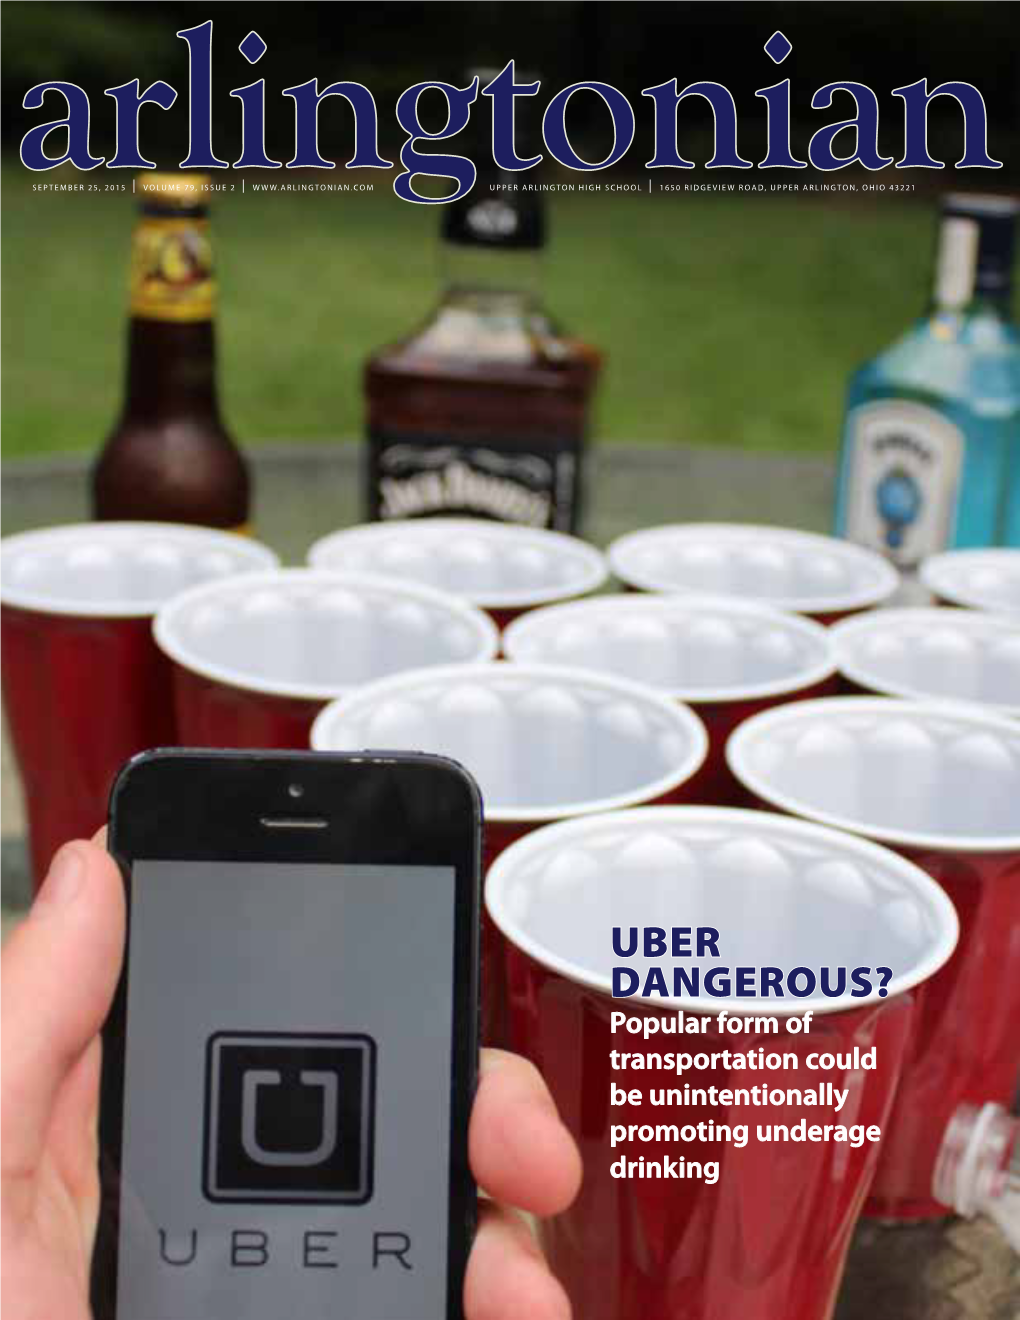 Uber Dangerous? Popular Form of Transportation Could Be Unintentionally Promoting Underage Drinking Mediterranean Cuisine